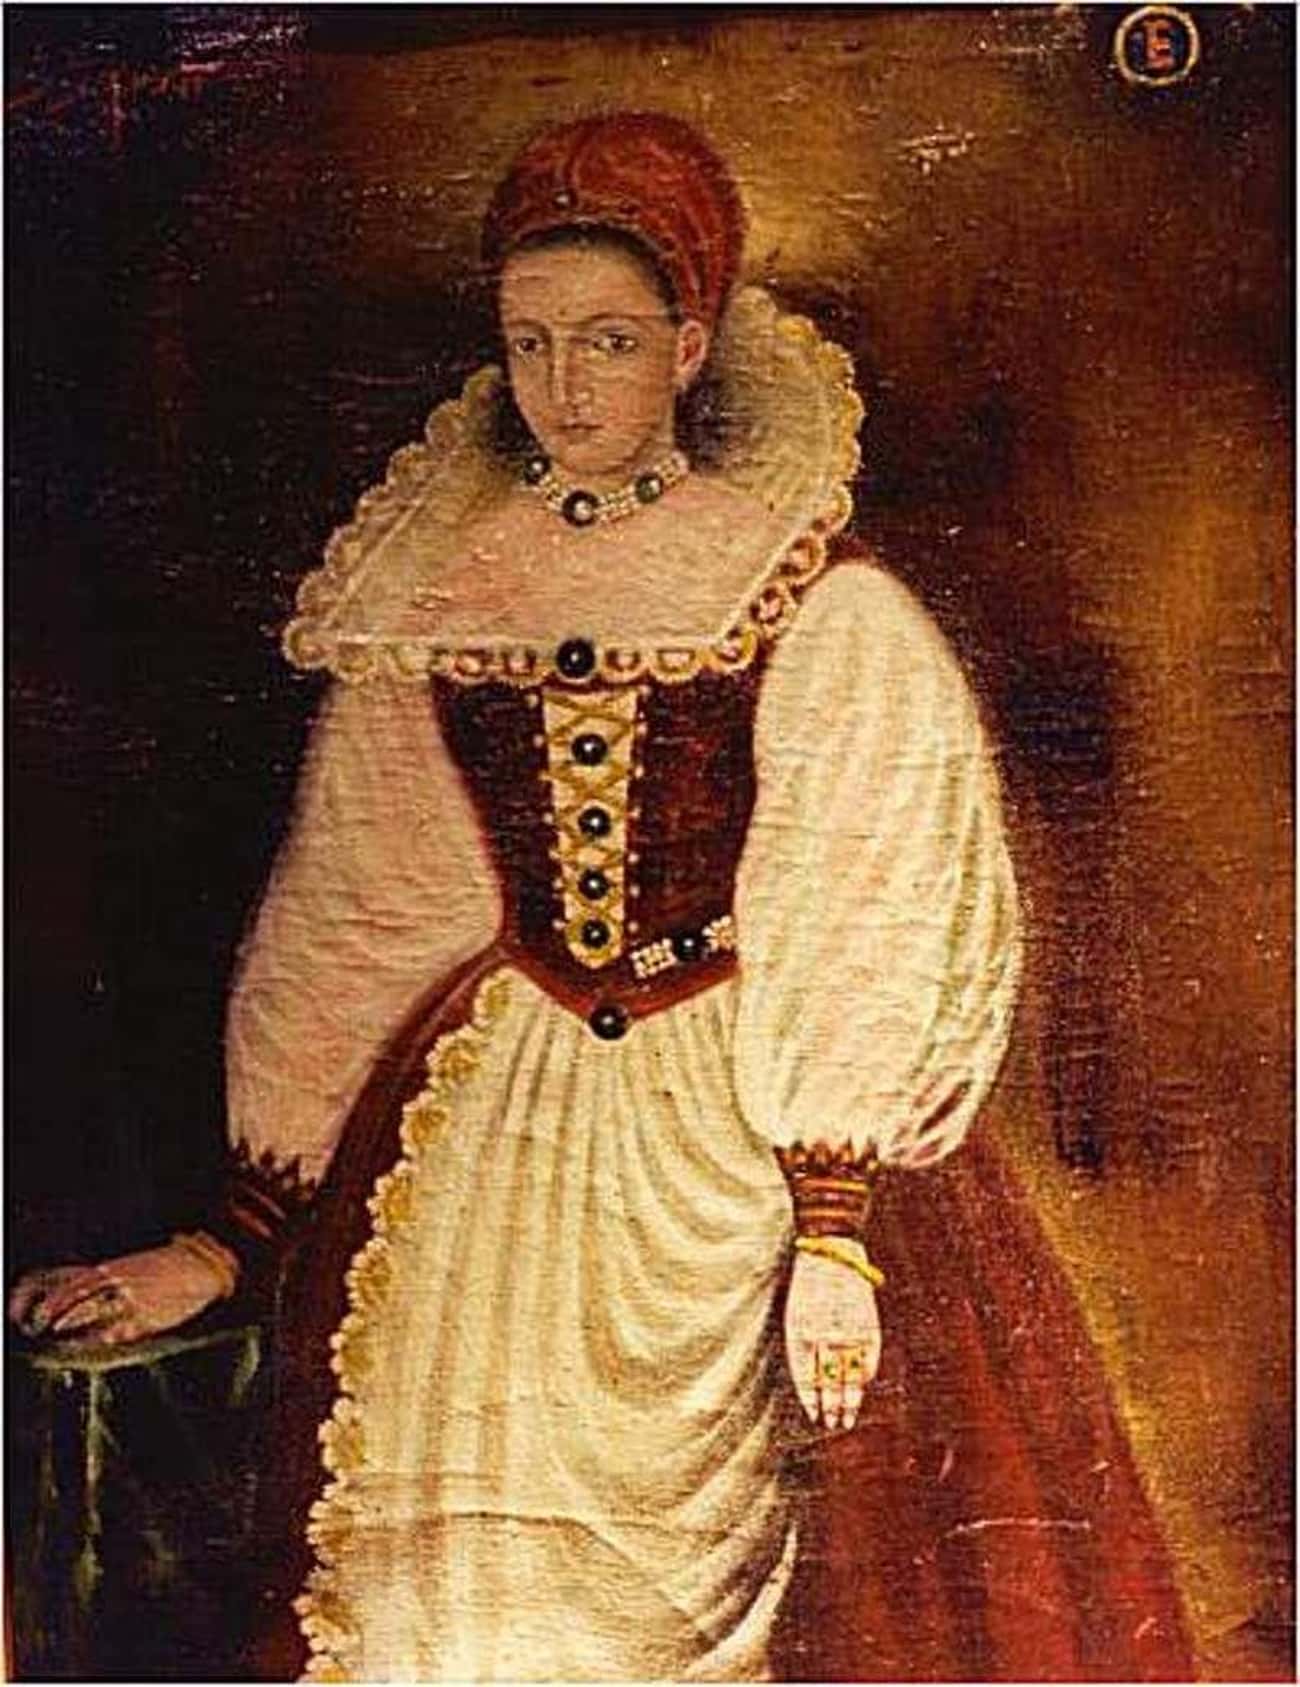 Countess Elizabeth Bathory Murdered Young Women And Drank Their Blood